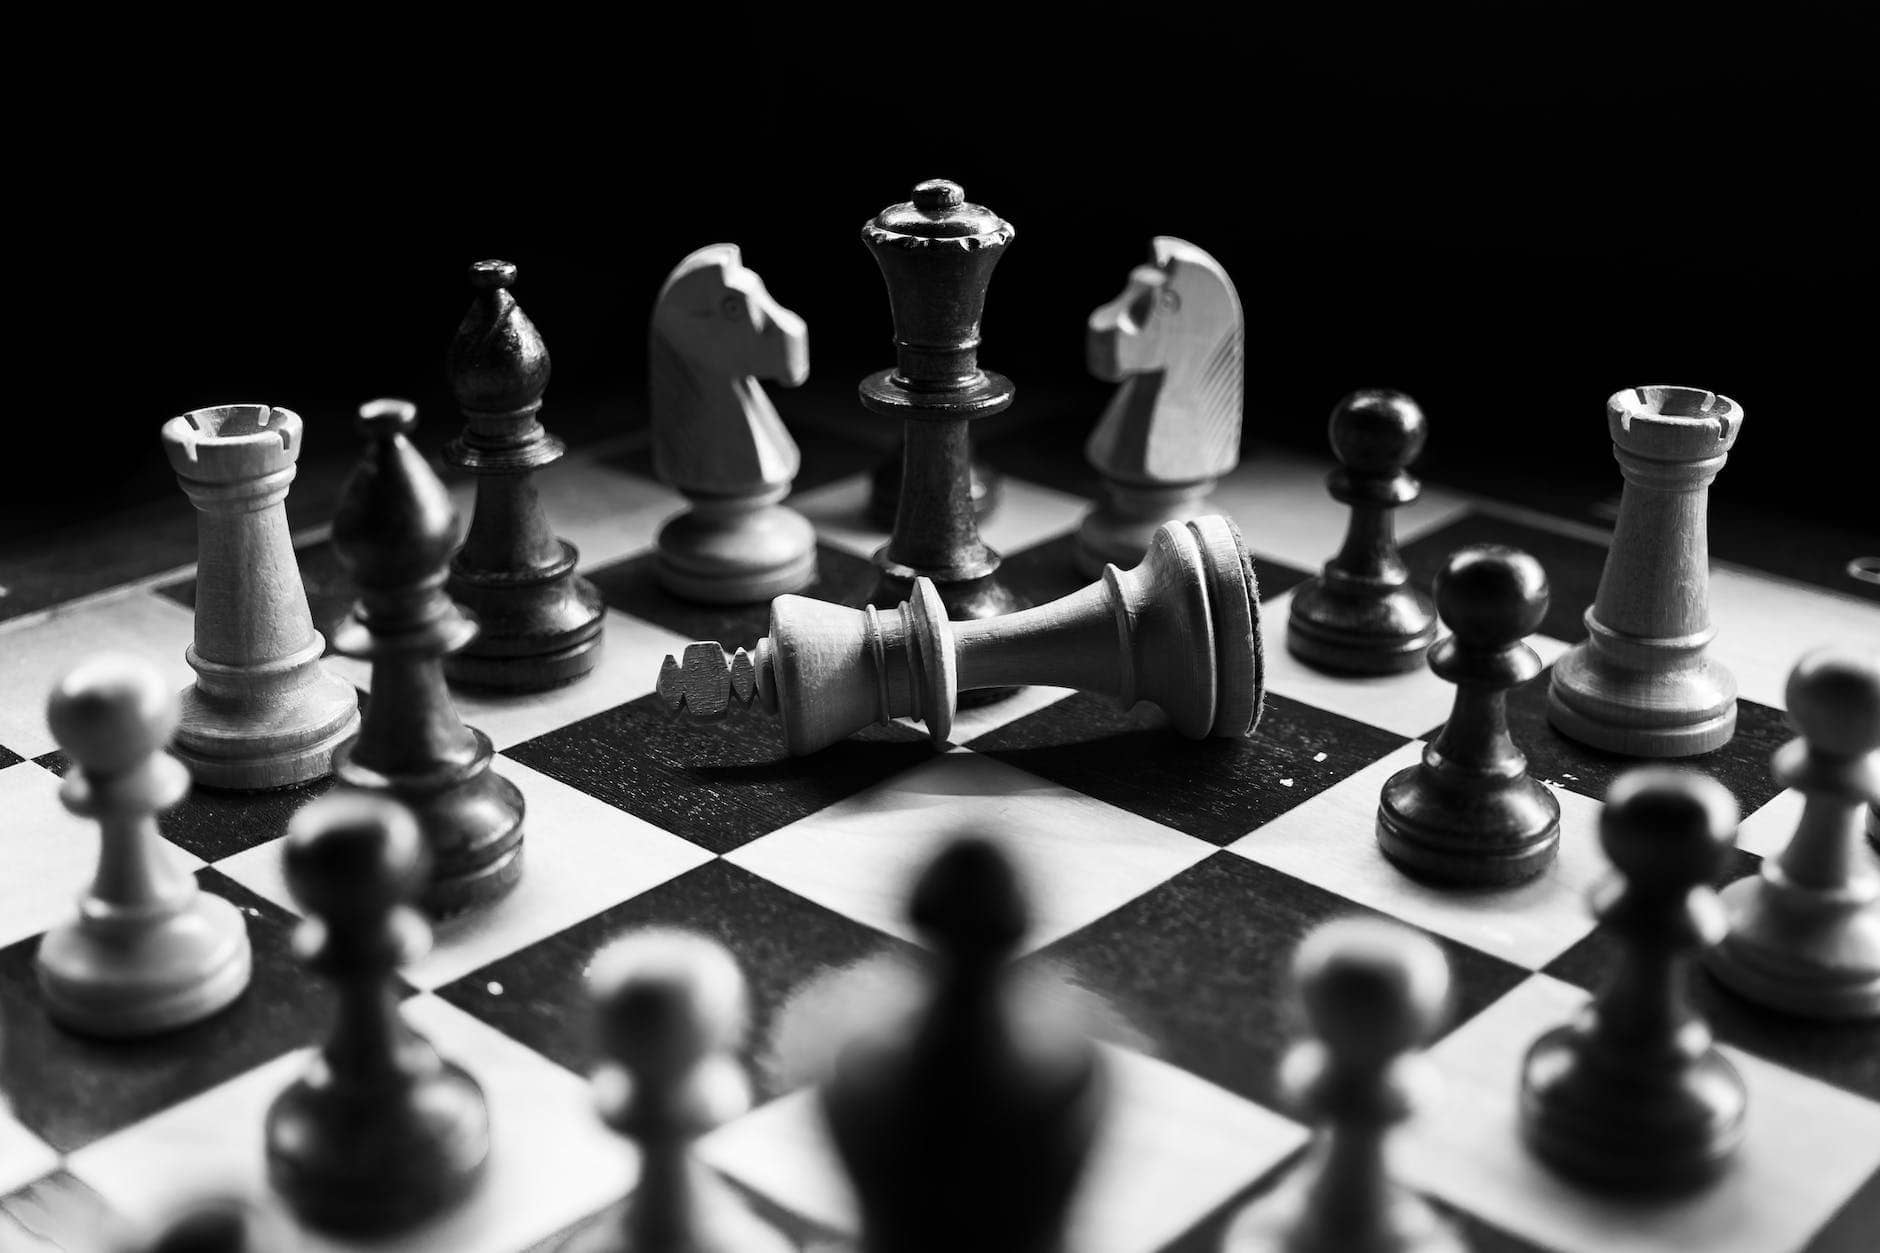 grayscale photography of chessboard game